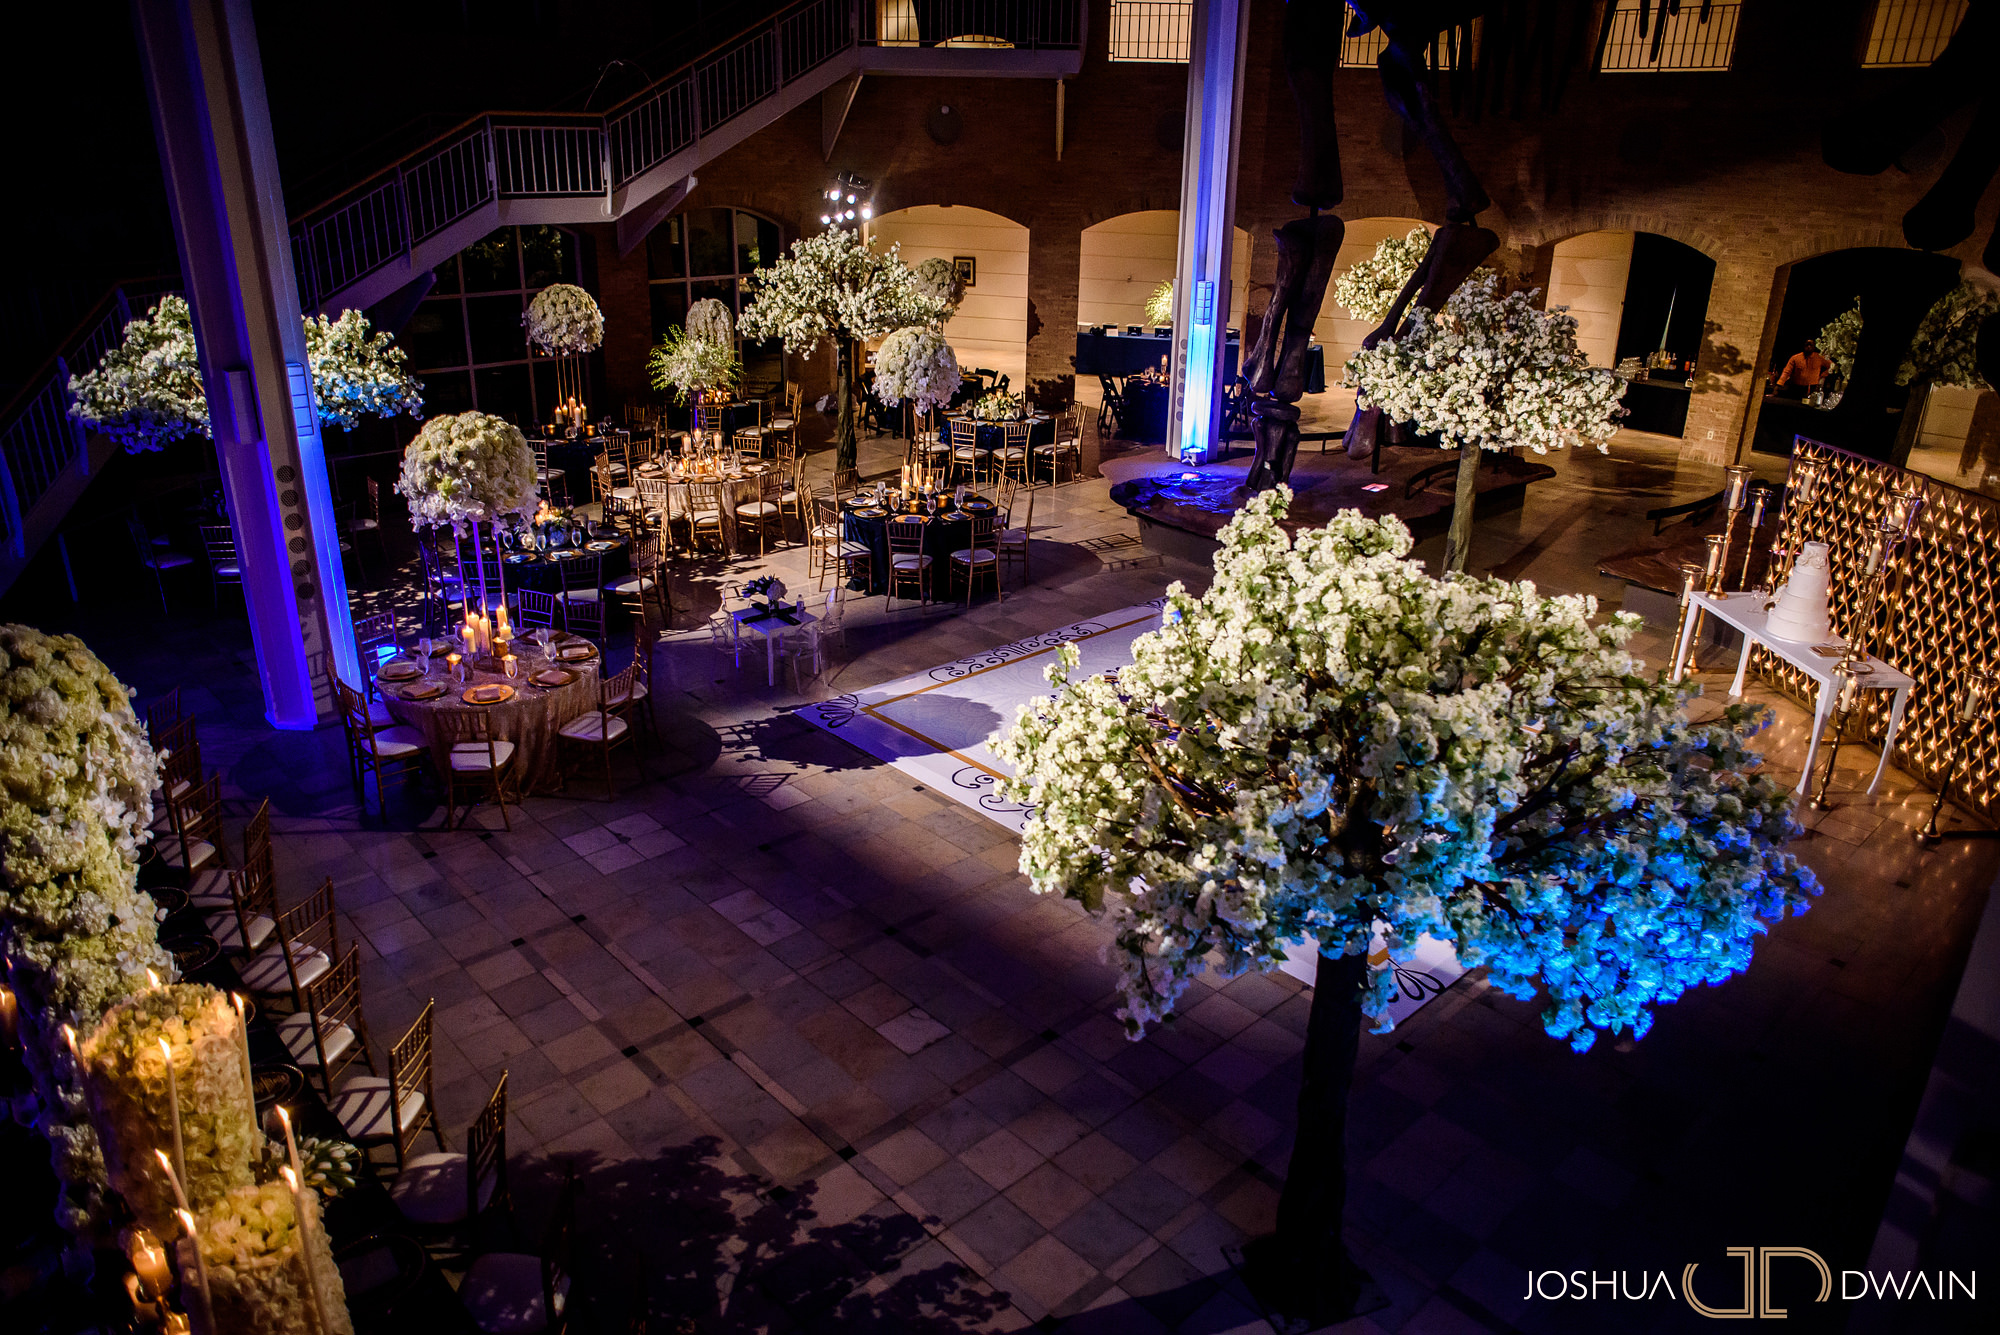 Alena & Prince's Wedding at the Fernbank Museum of Natural History